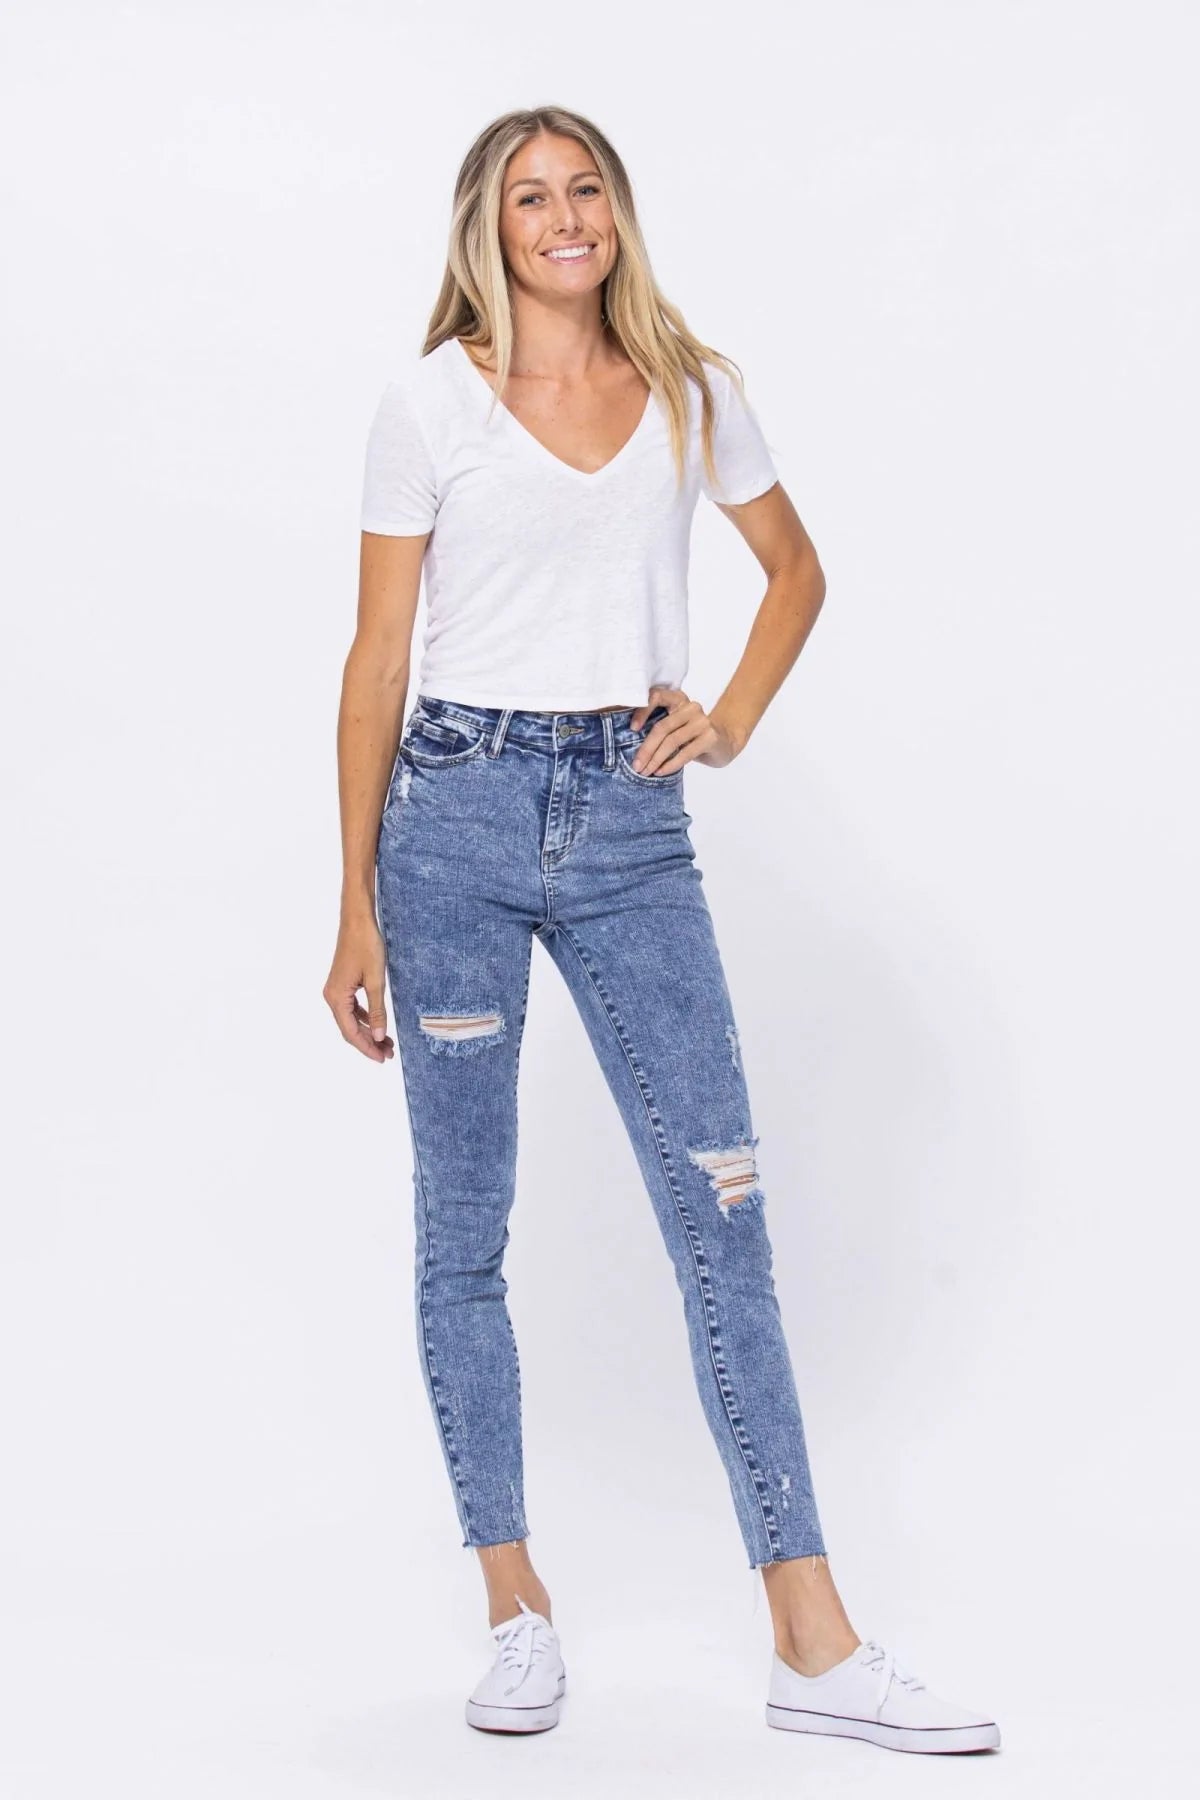 Judy Blue High Rise Acid Wash Destroyed Skinny Jeans - Passion of Essence Boutique